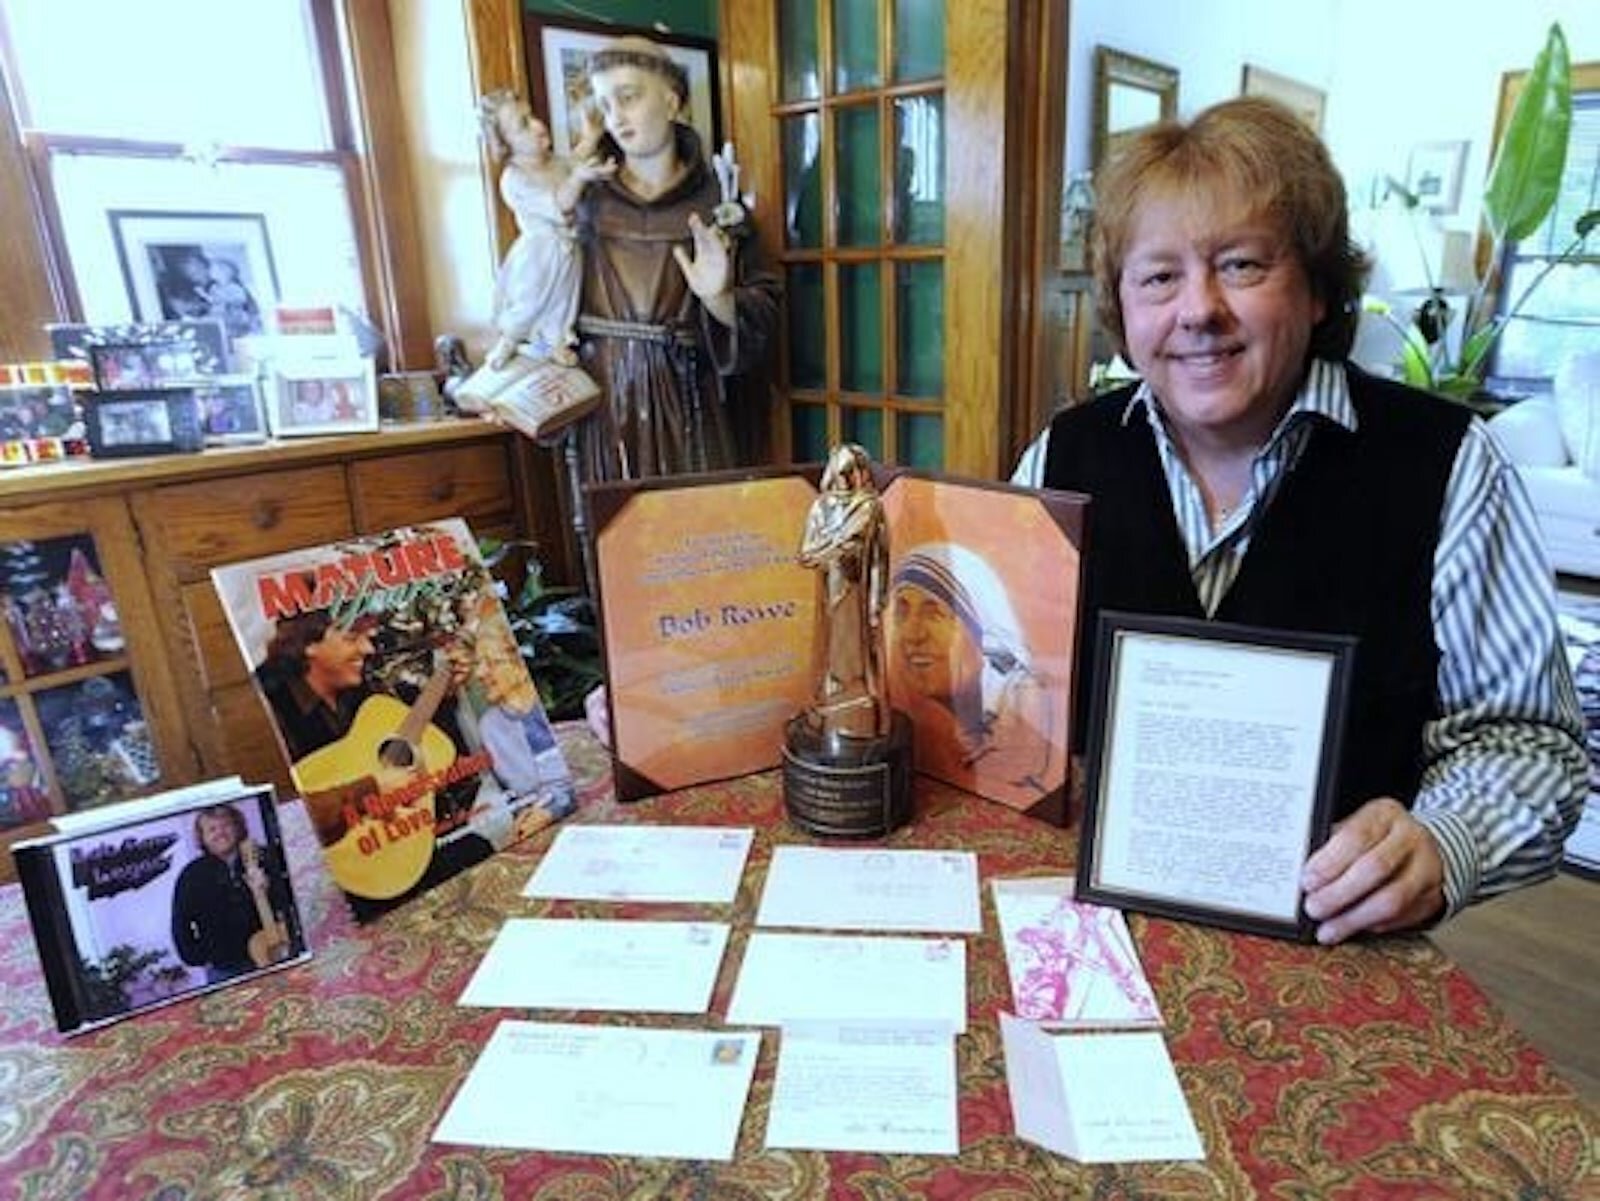 Bob with Mother Teresa letters and awards.